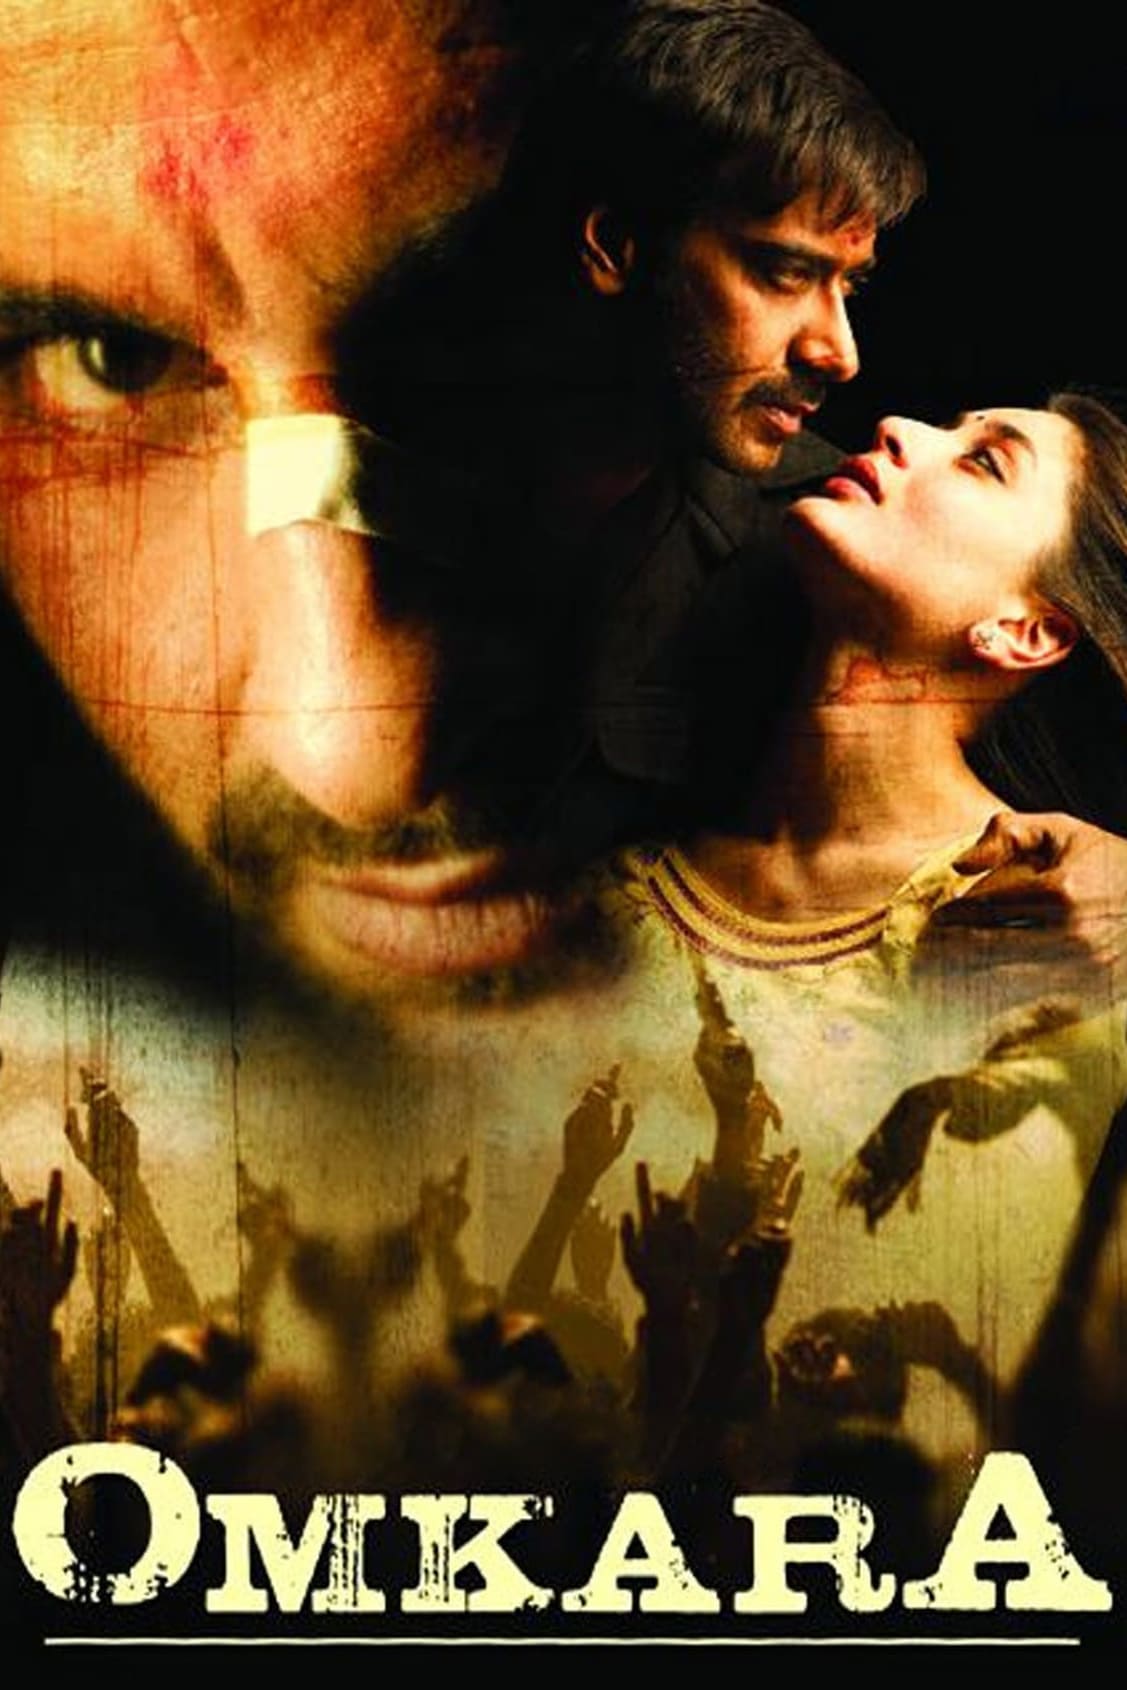 Poster for the movie "Omkara"